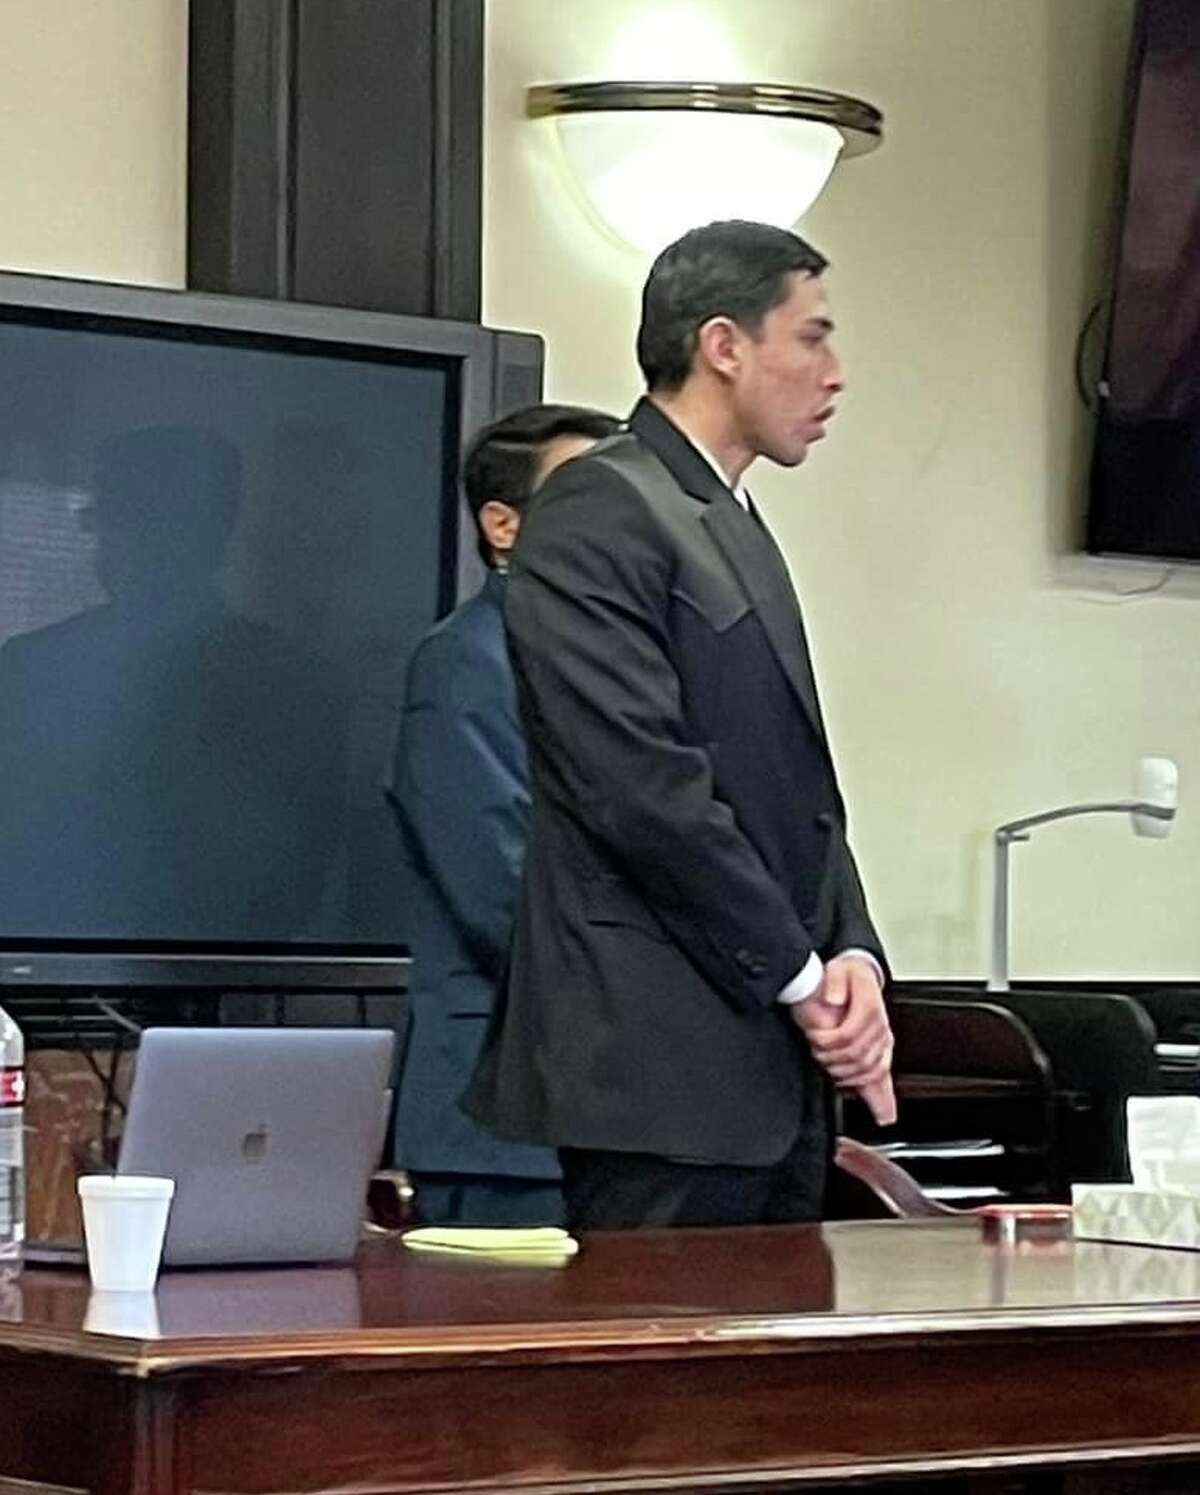 Francisco Javier Santos Jr. was sentenced on Friday to 40 years for murder and 20 years for burglary of habitation with intent to commit other felony. The sentences will run concurrently.